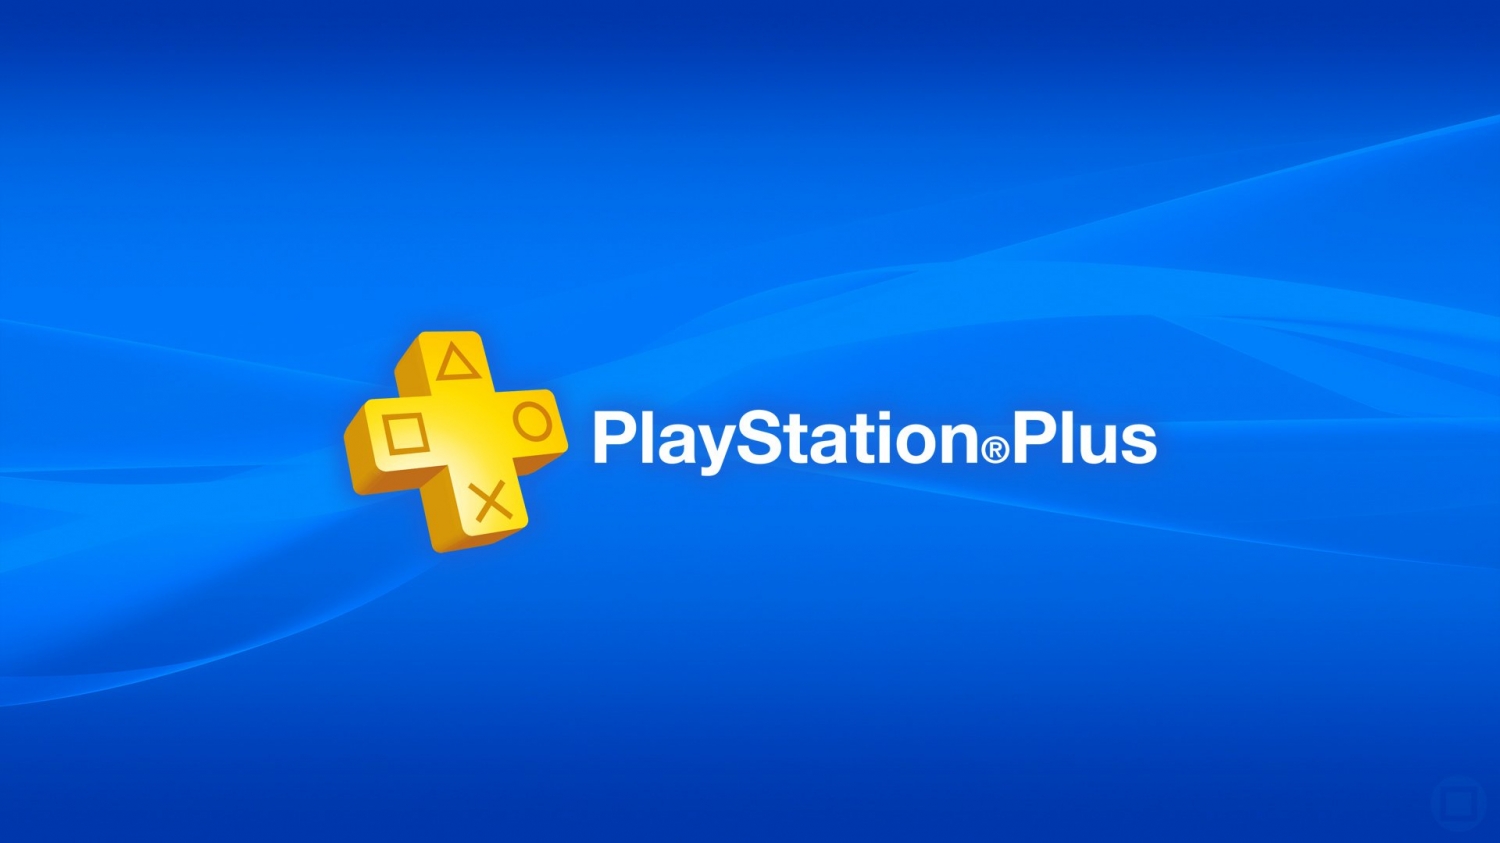 PS5 version of 2019's best game is free Plus